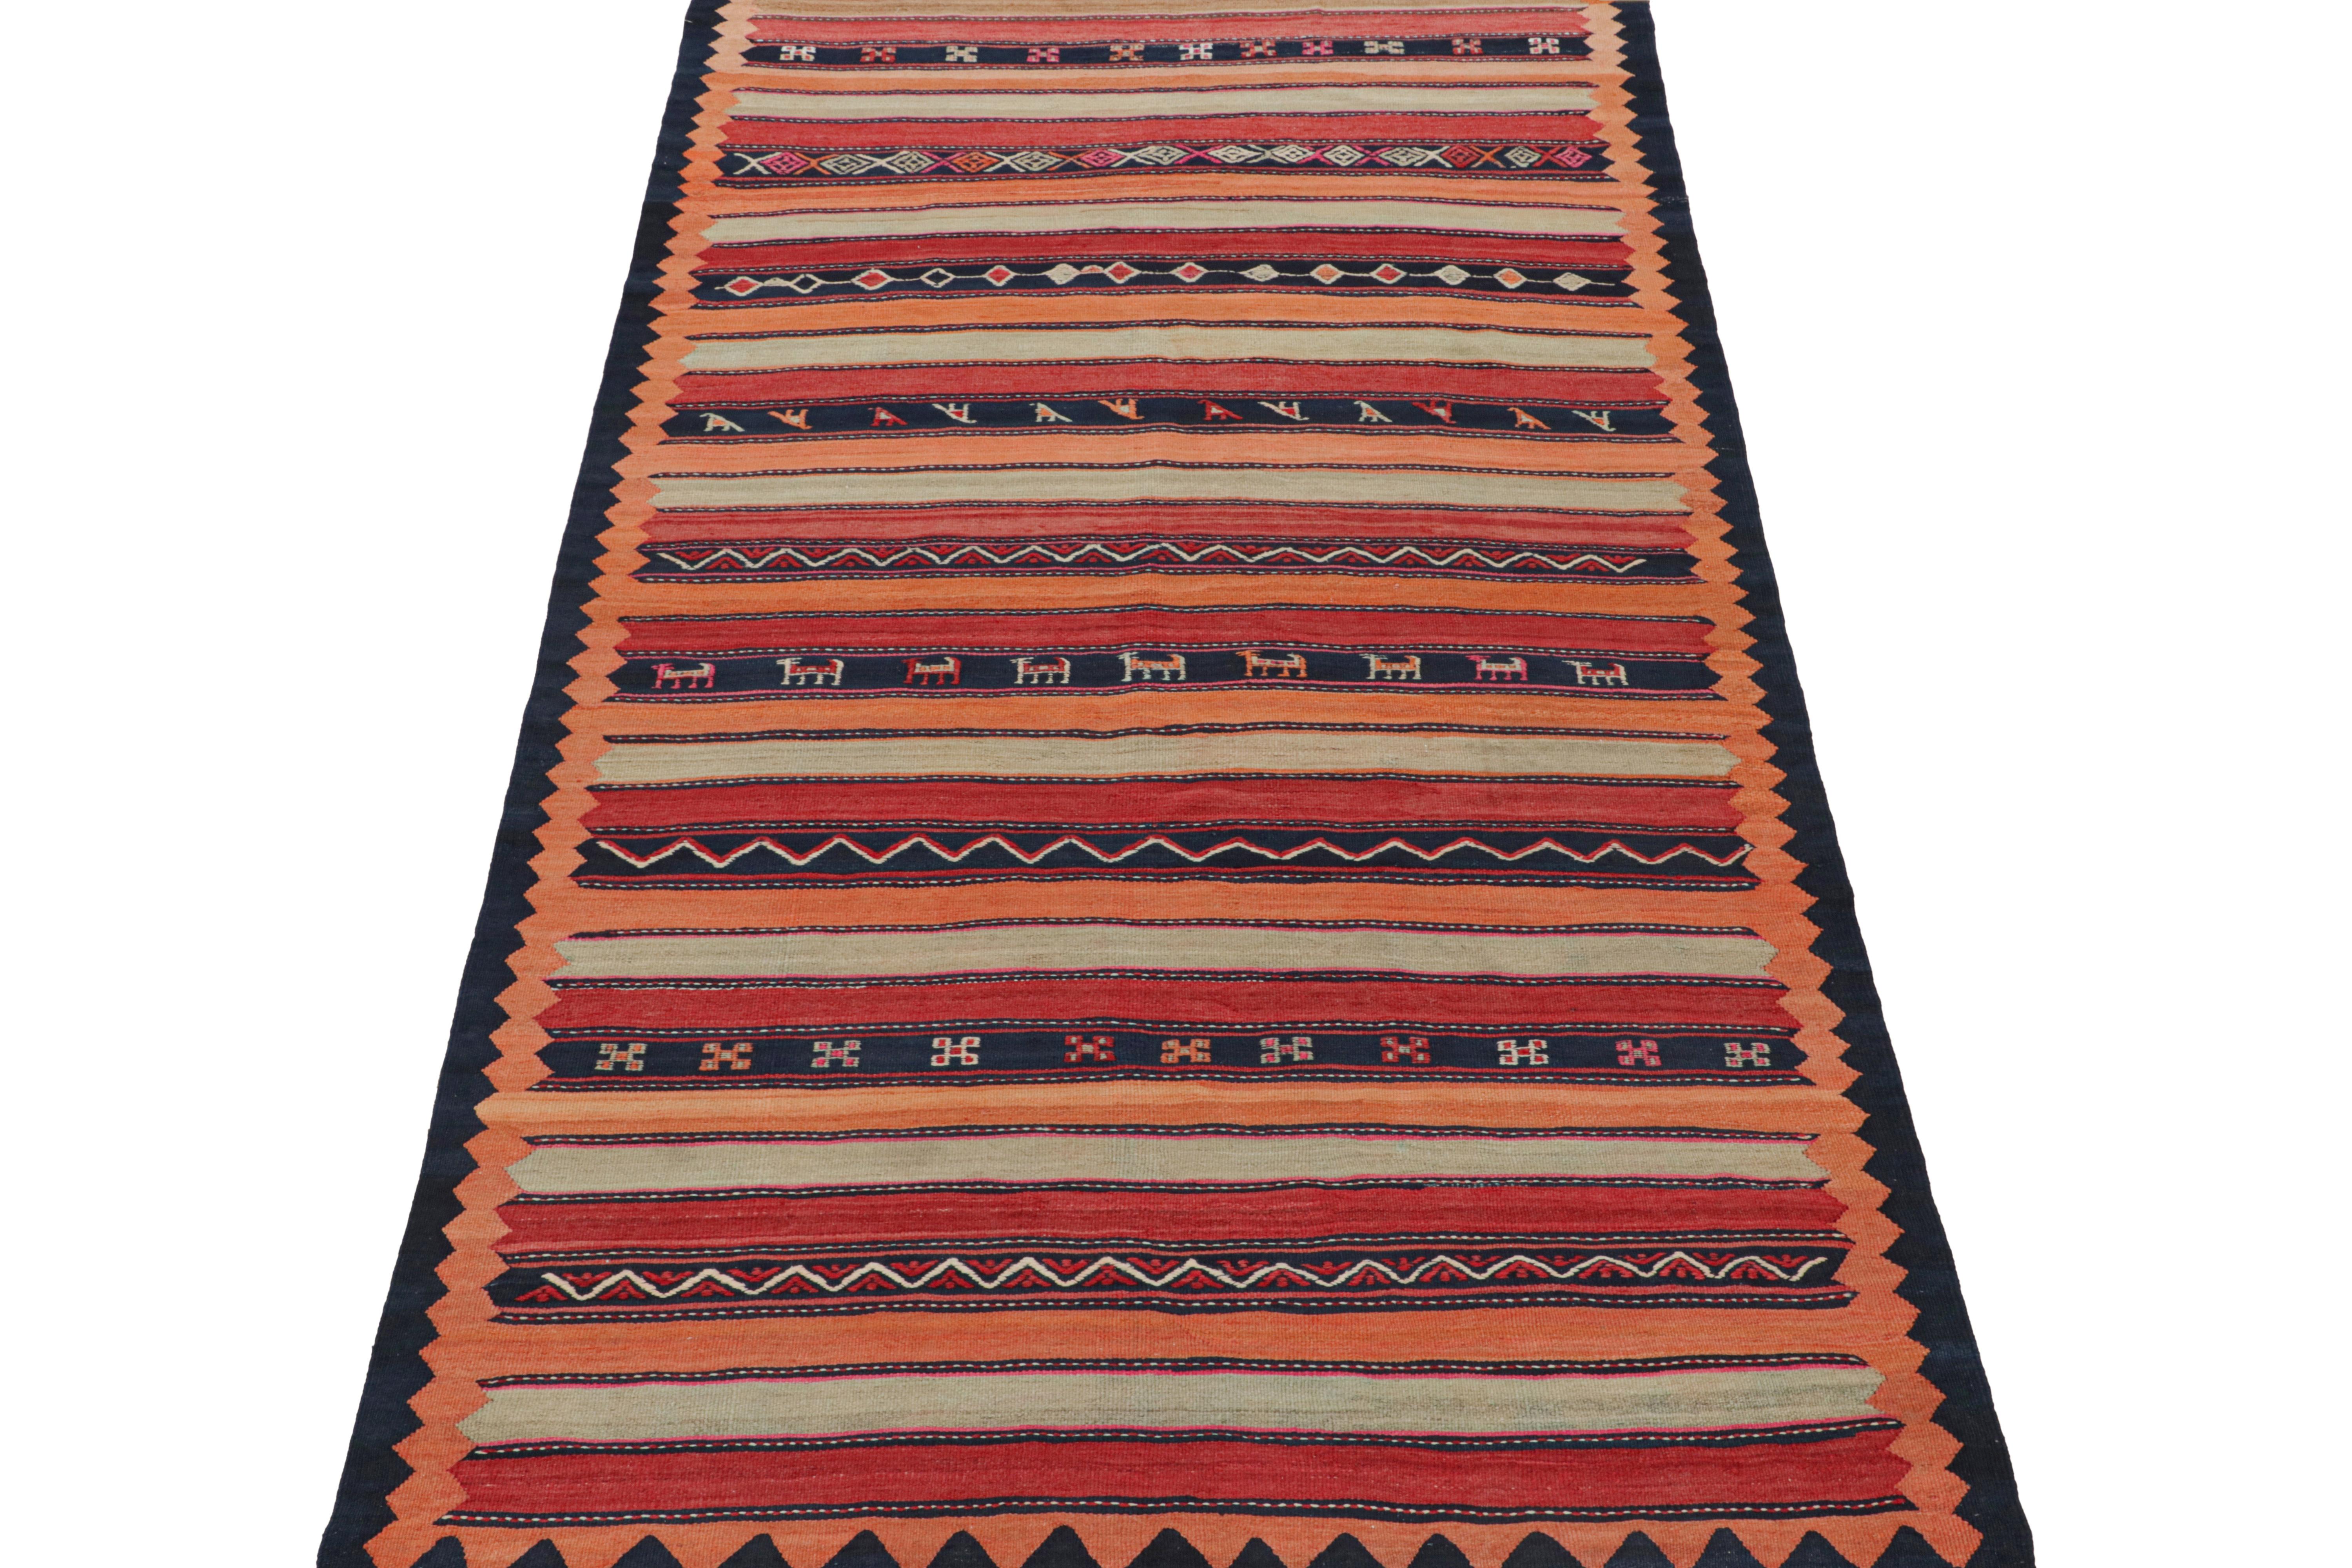 This vintage 5x10 Persian Kilim is believed to be a midcentury Shahsavan tribal rug. Handwoven in wool, it originates circa 1950-1960 and enjoys an interesting striped design. 

On the Design:

The design enjoys warm colors in stripes and